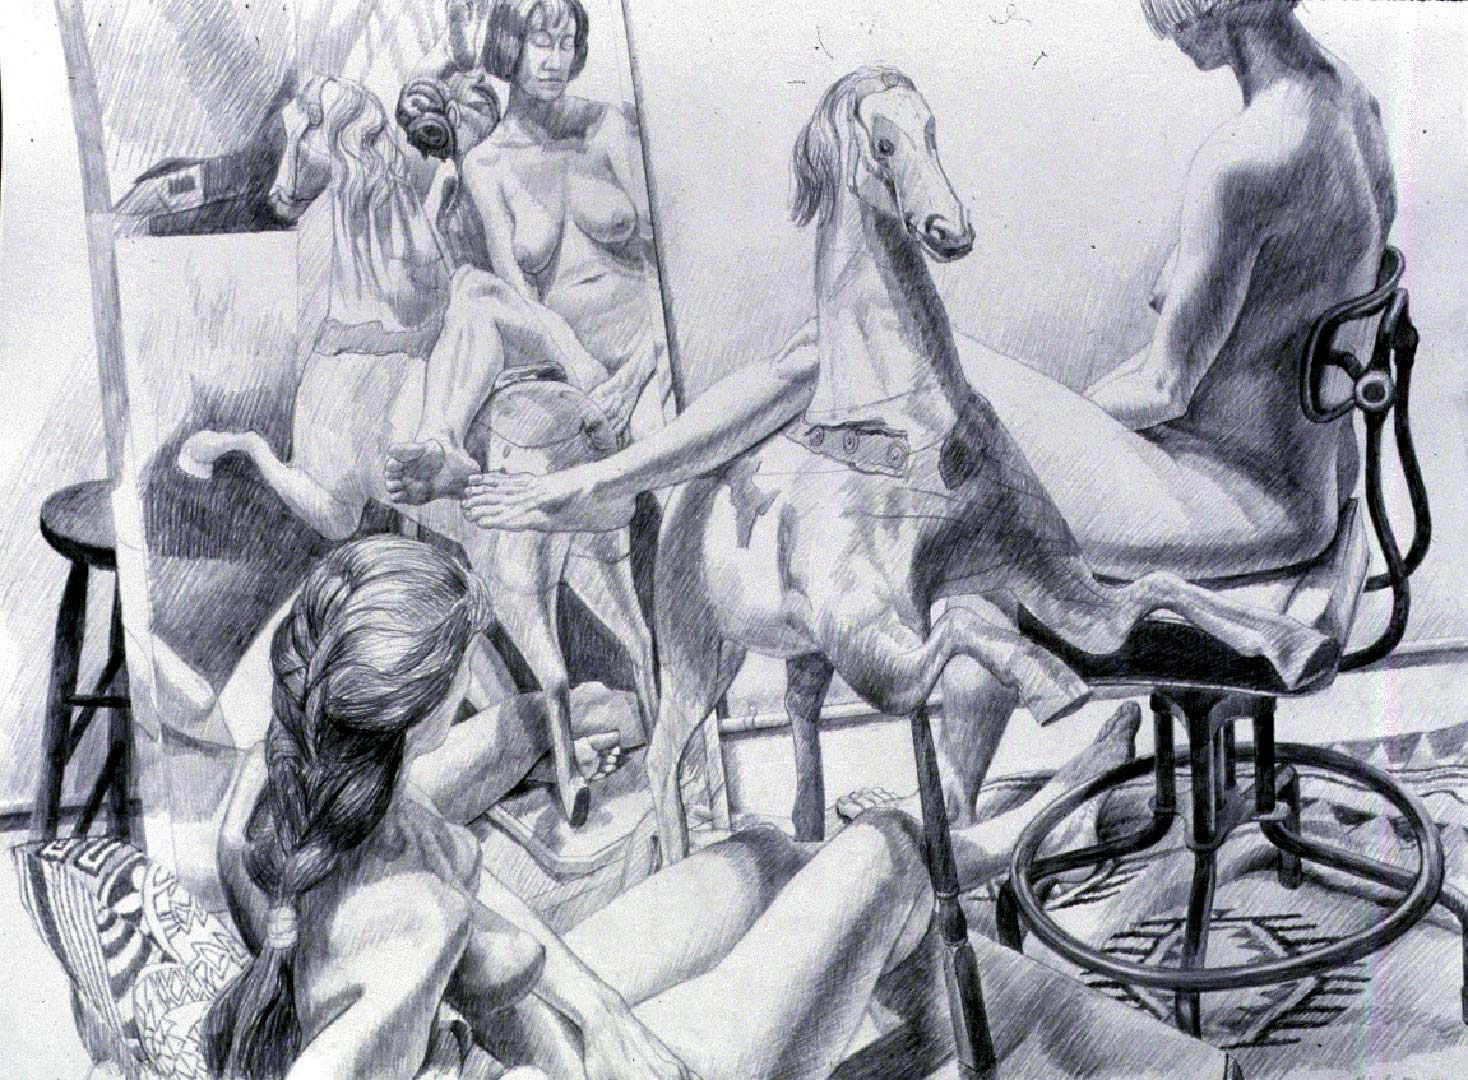 1989 Study for Nudes